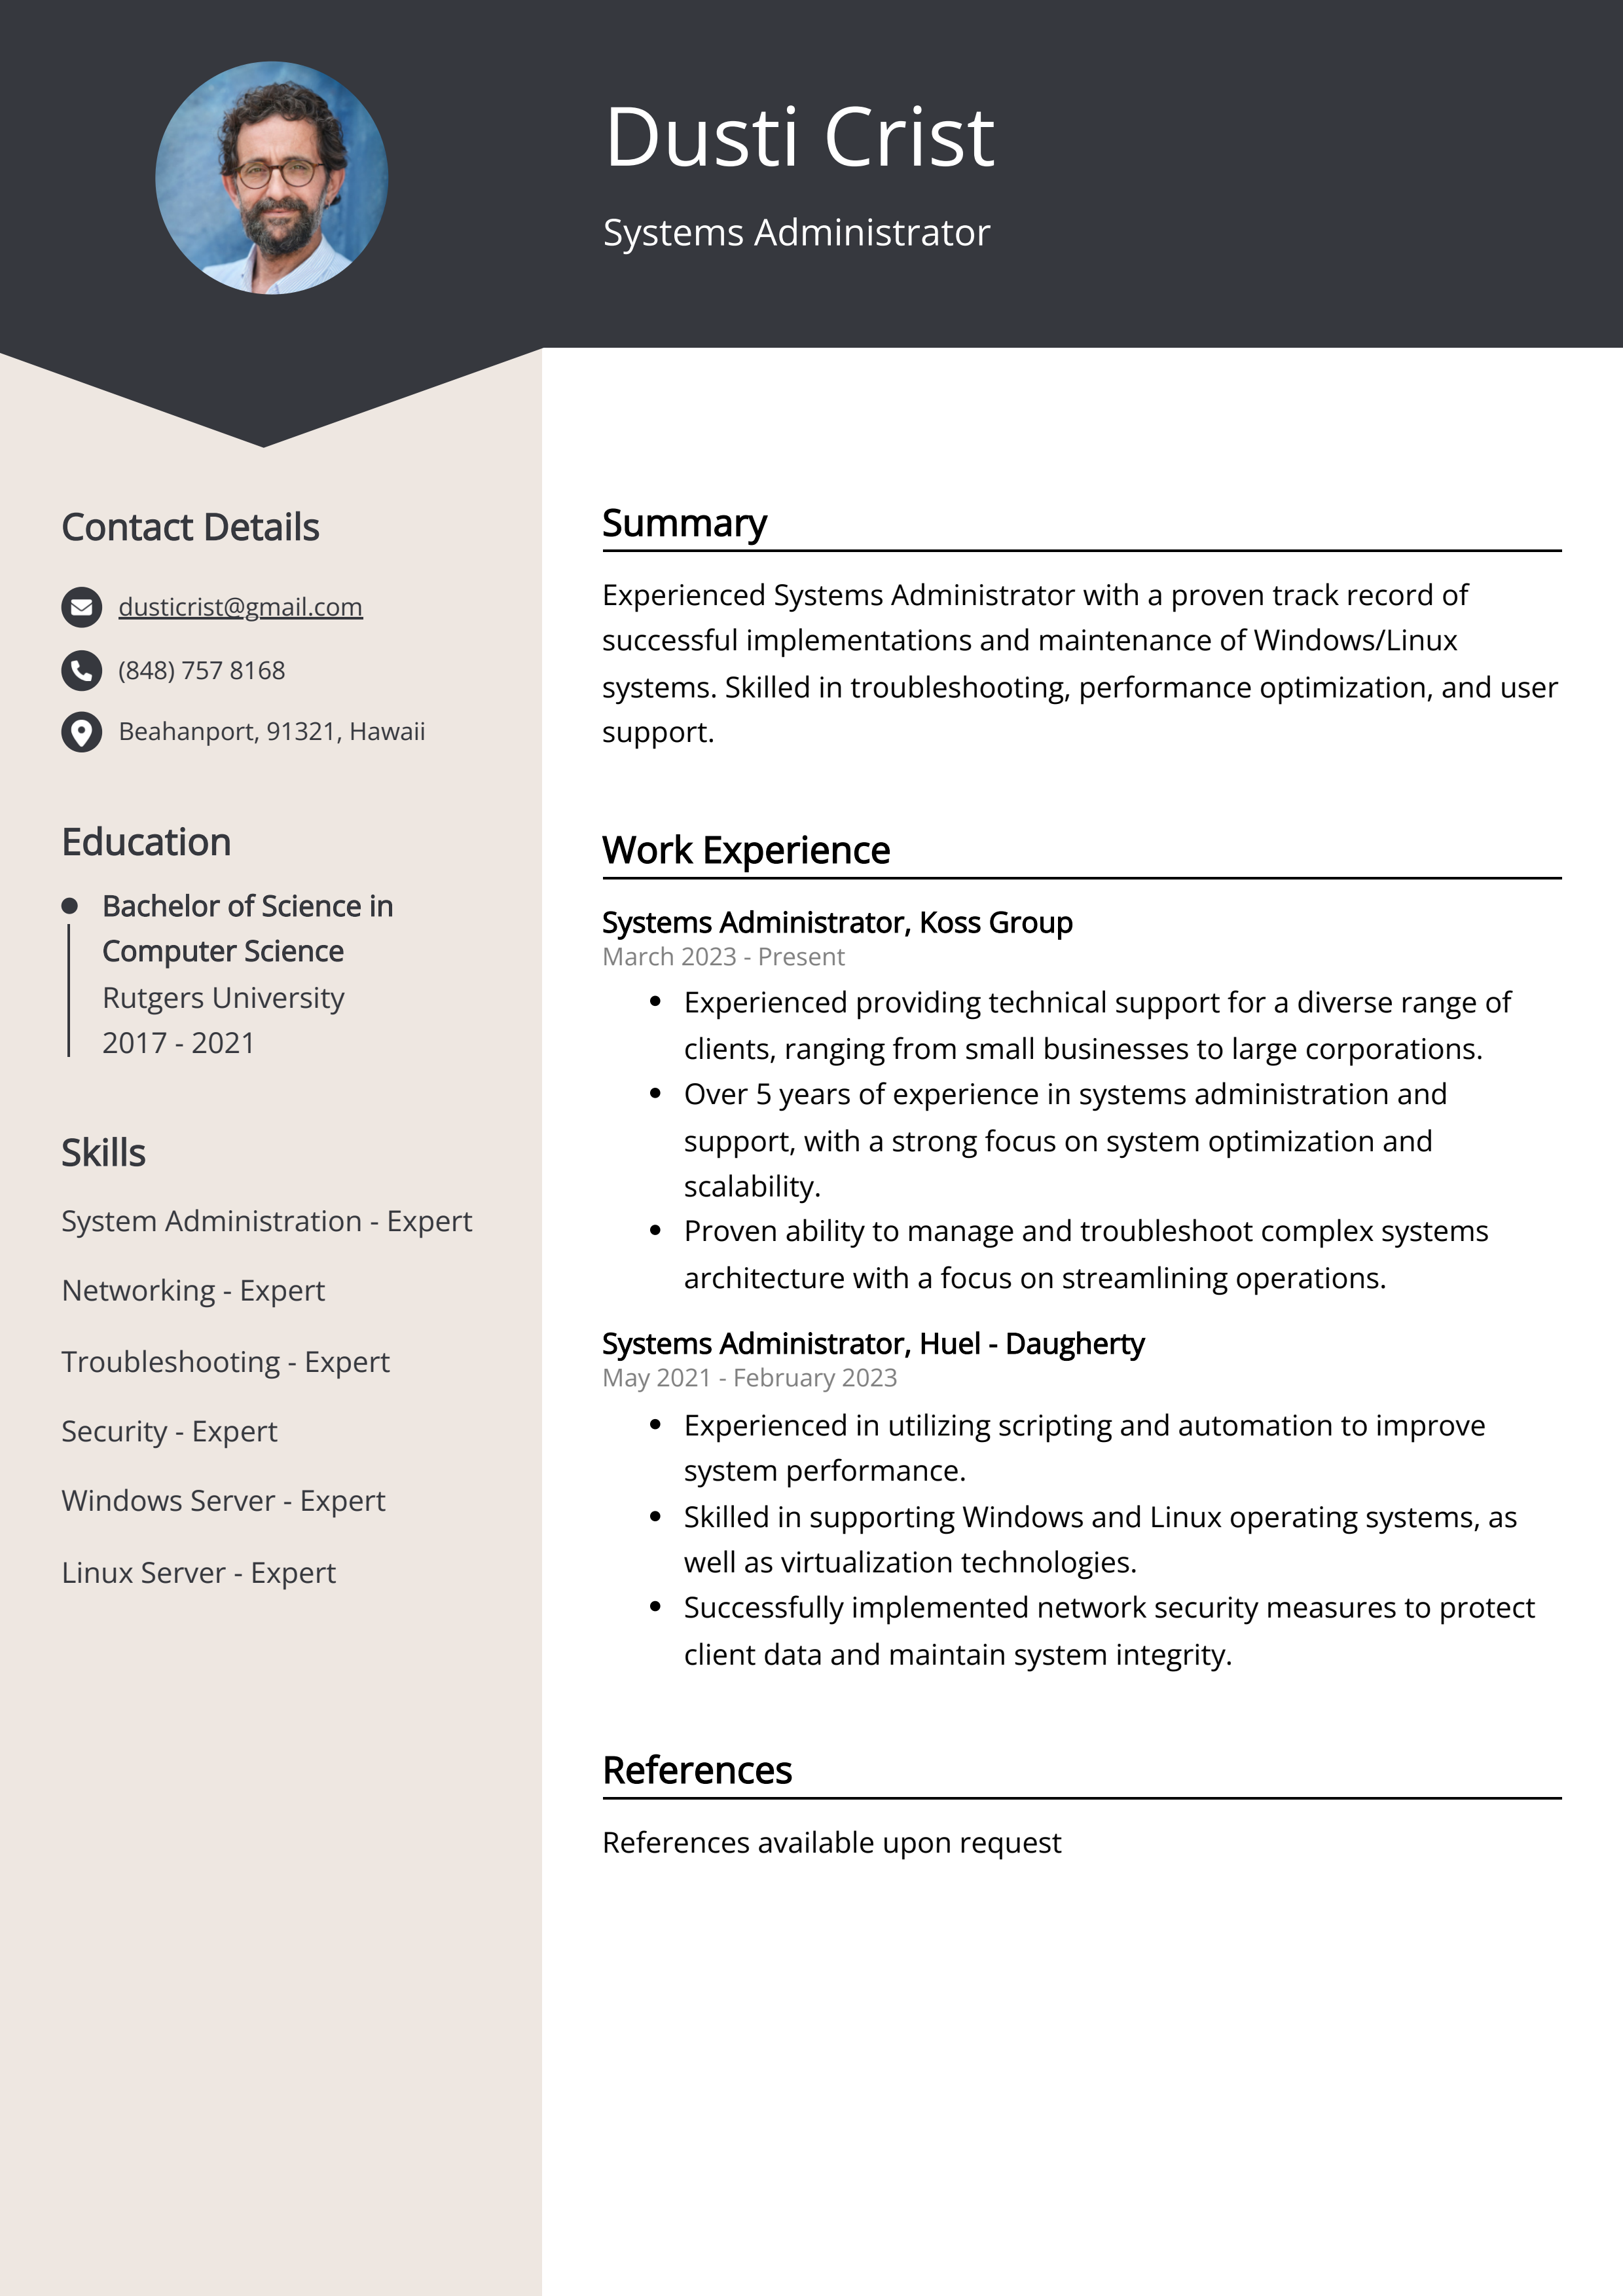 Systems Administrator CV Example